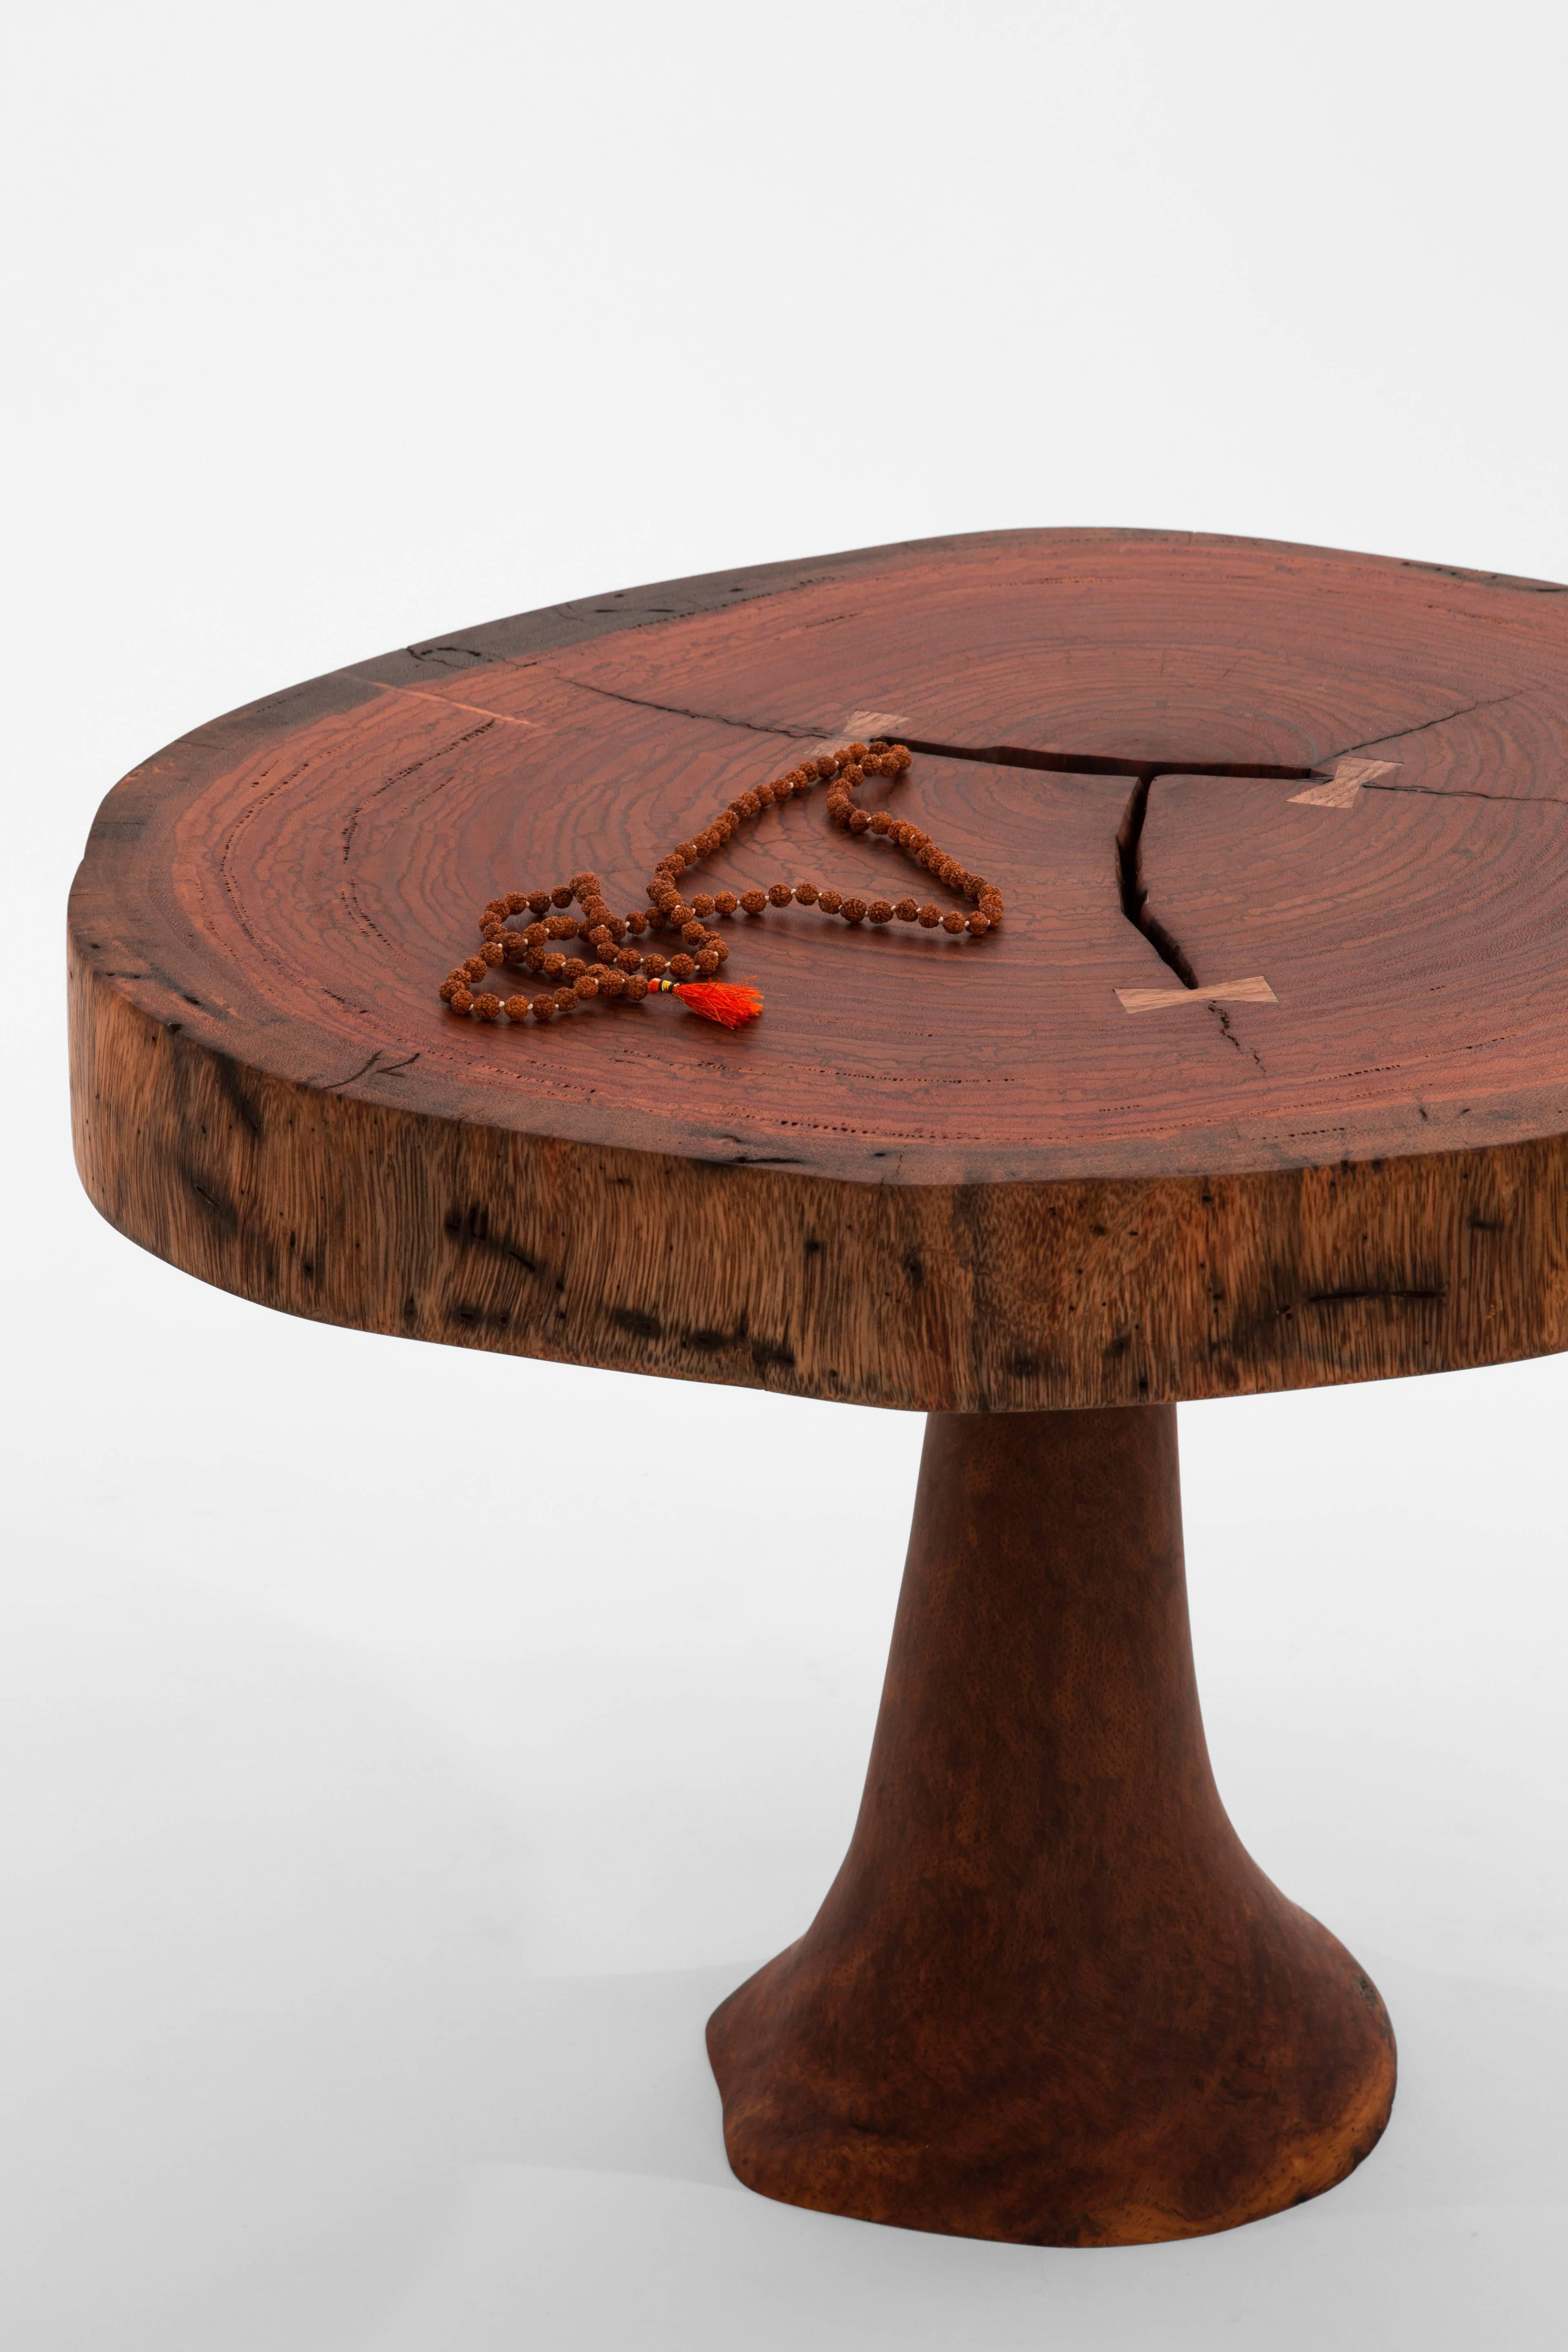 Unique signed table by Jörg Pietschmann
Table · Ebiara / Australian grass tree, T1104
Measures: H 43 x W 58 x D 55 cm tabletop 7 cm
Red coloured wood with three butterfly inlays, fixed on a leg of Australian grass tree.
Polished oil